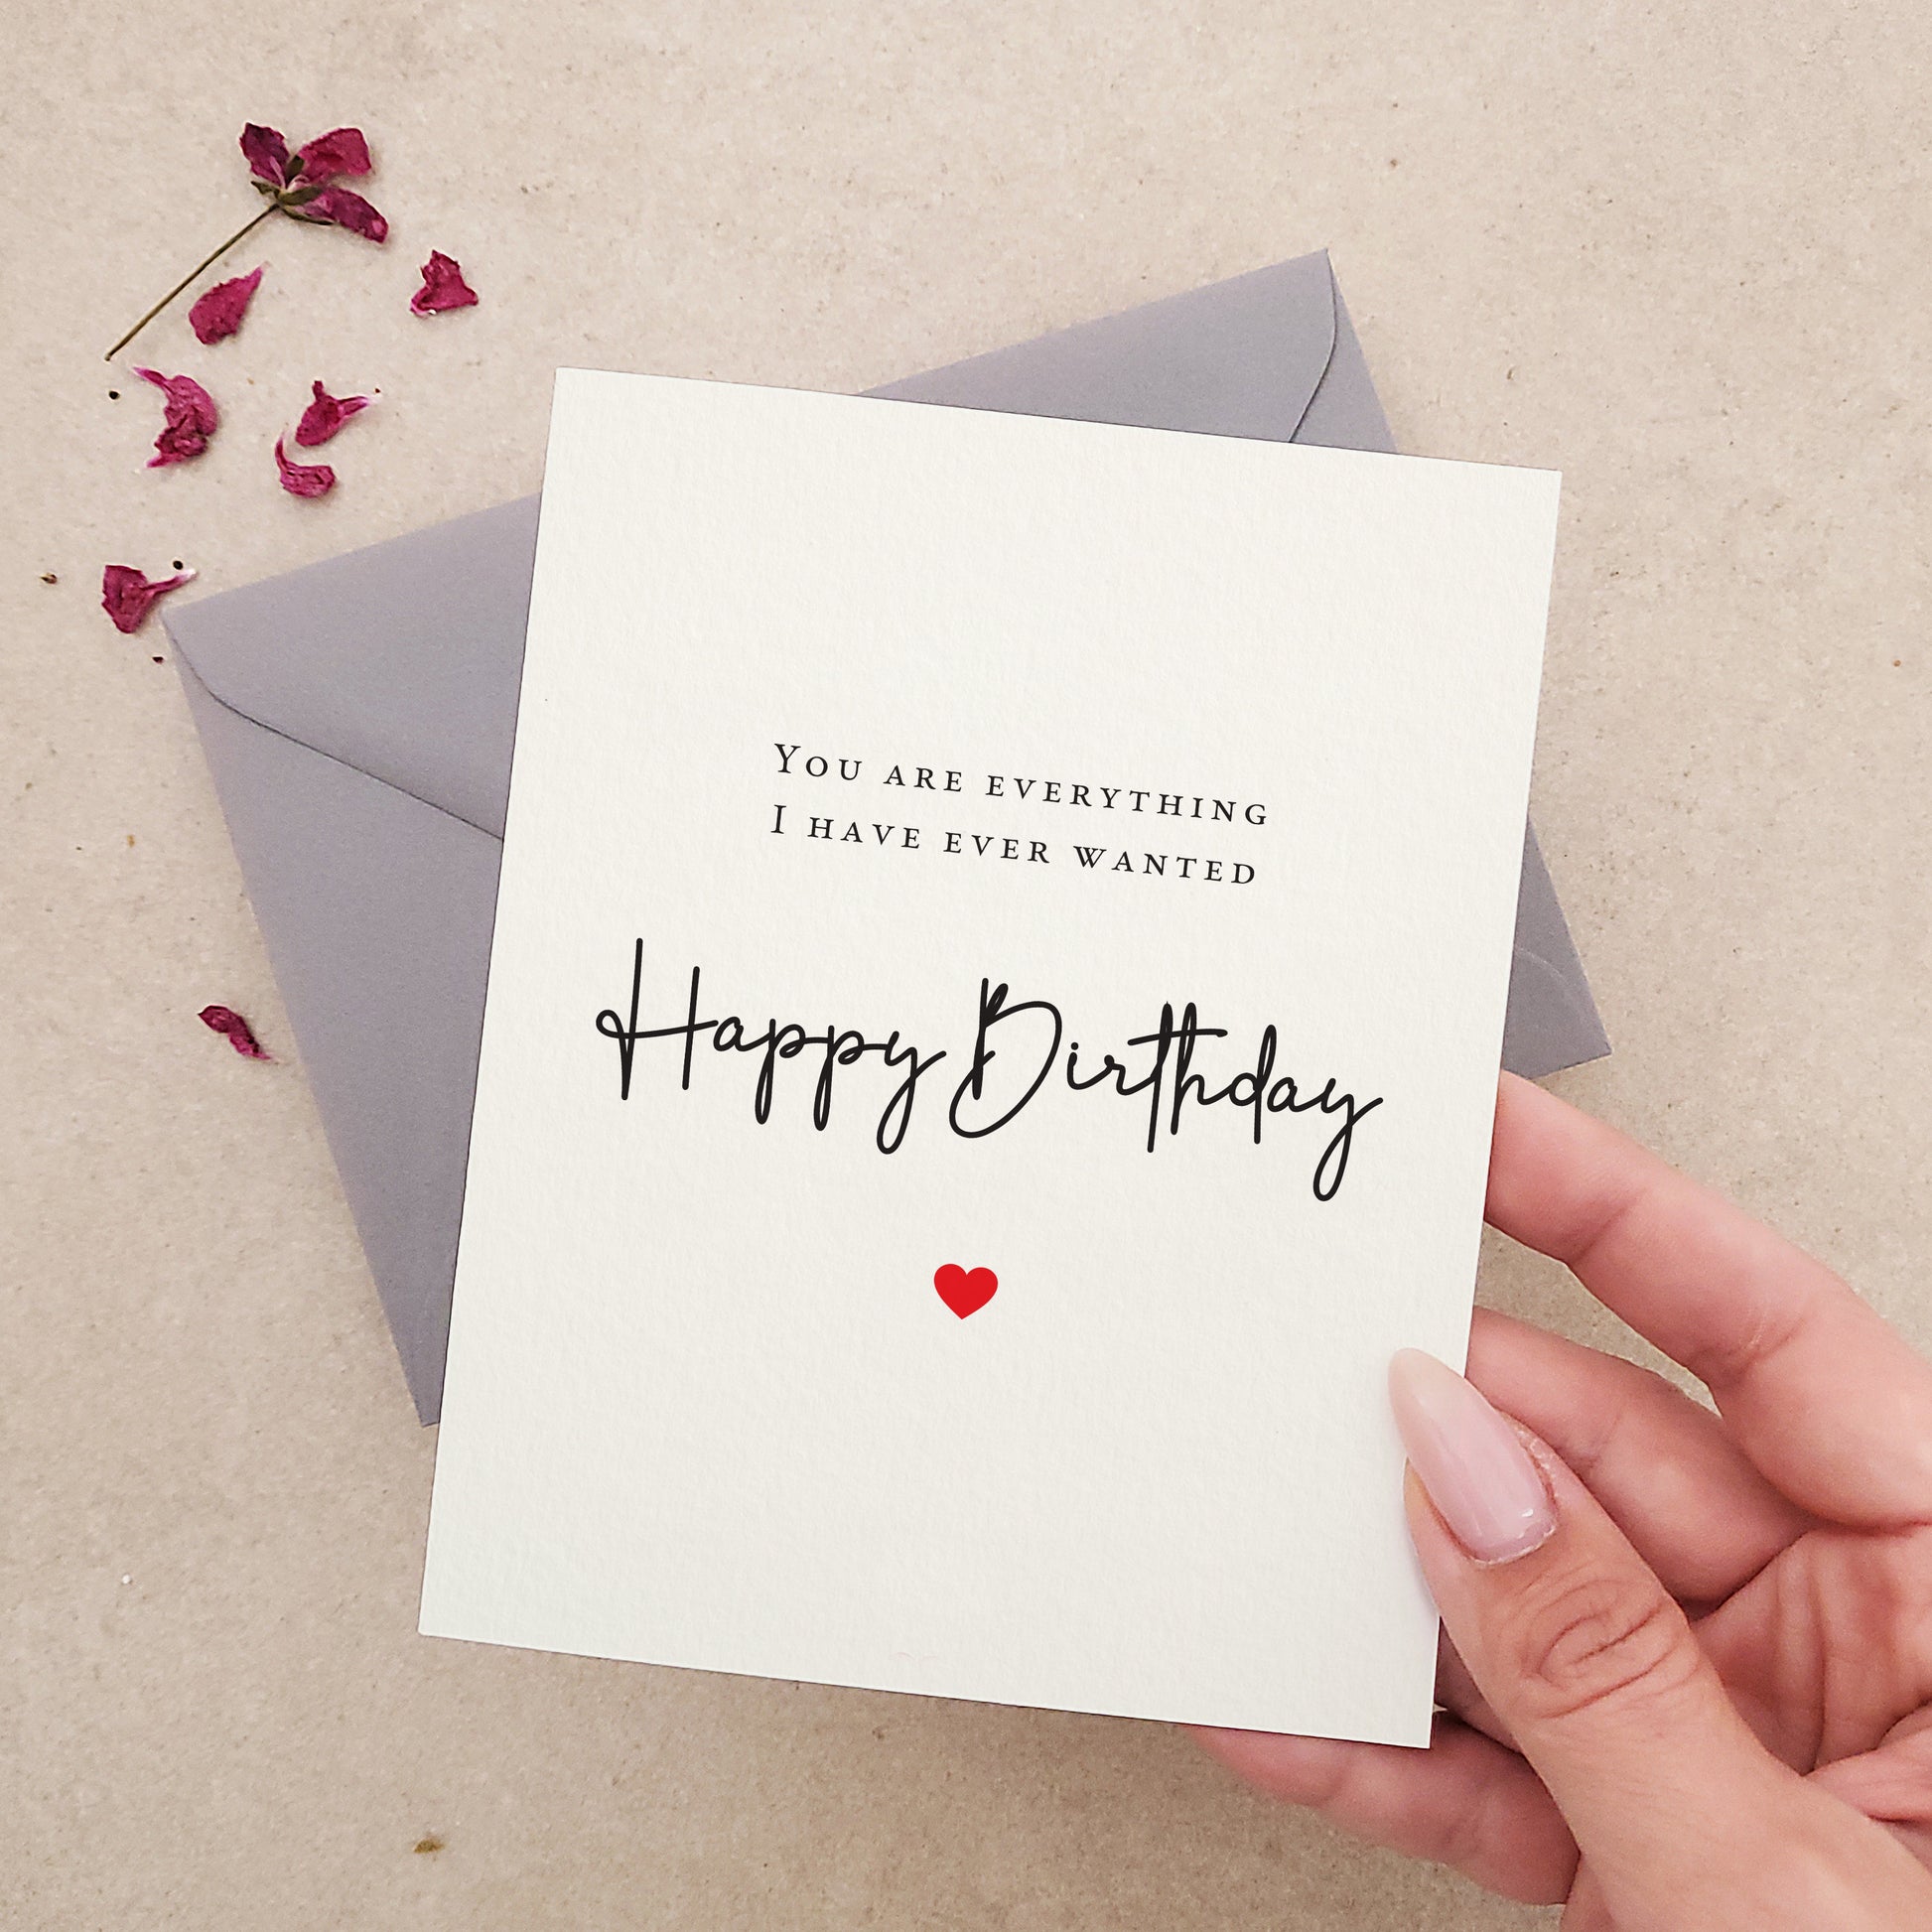 you are everything i have ever wanted birthday card - XOXOKristen